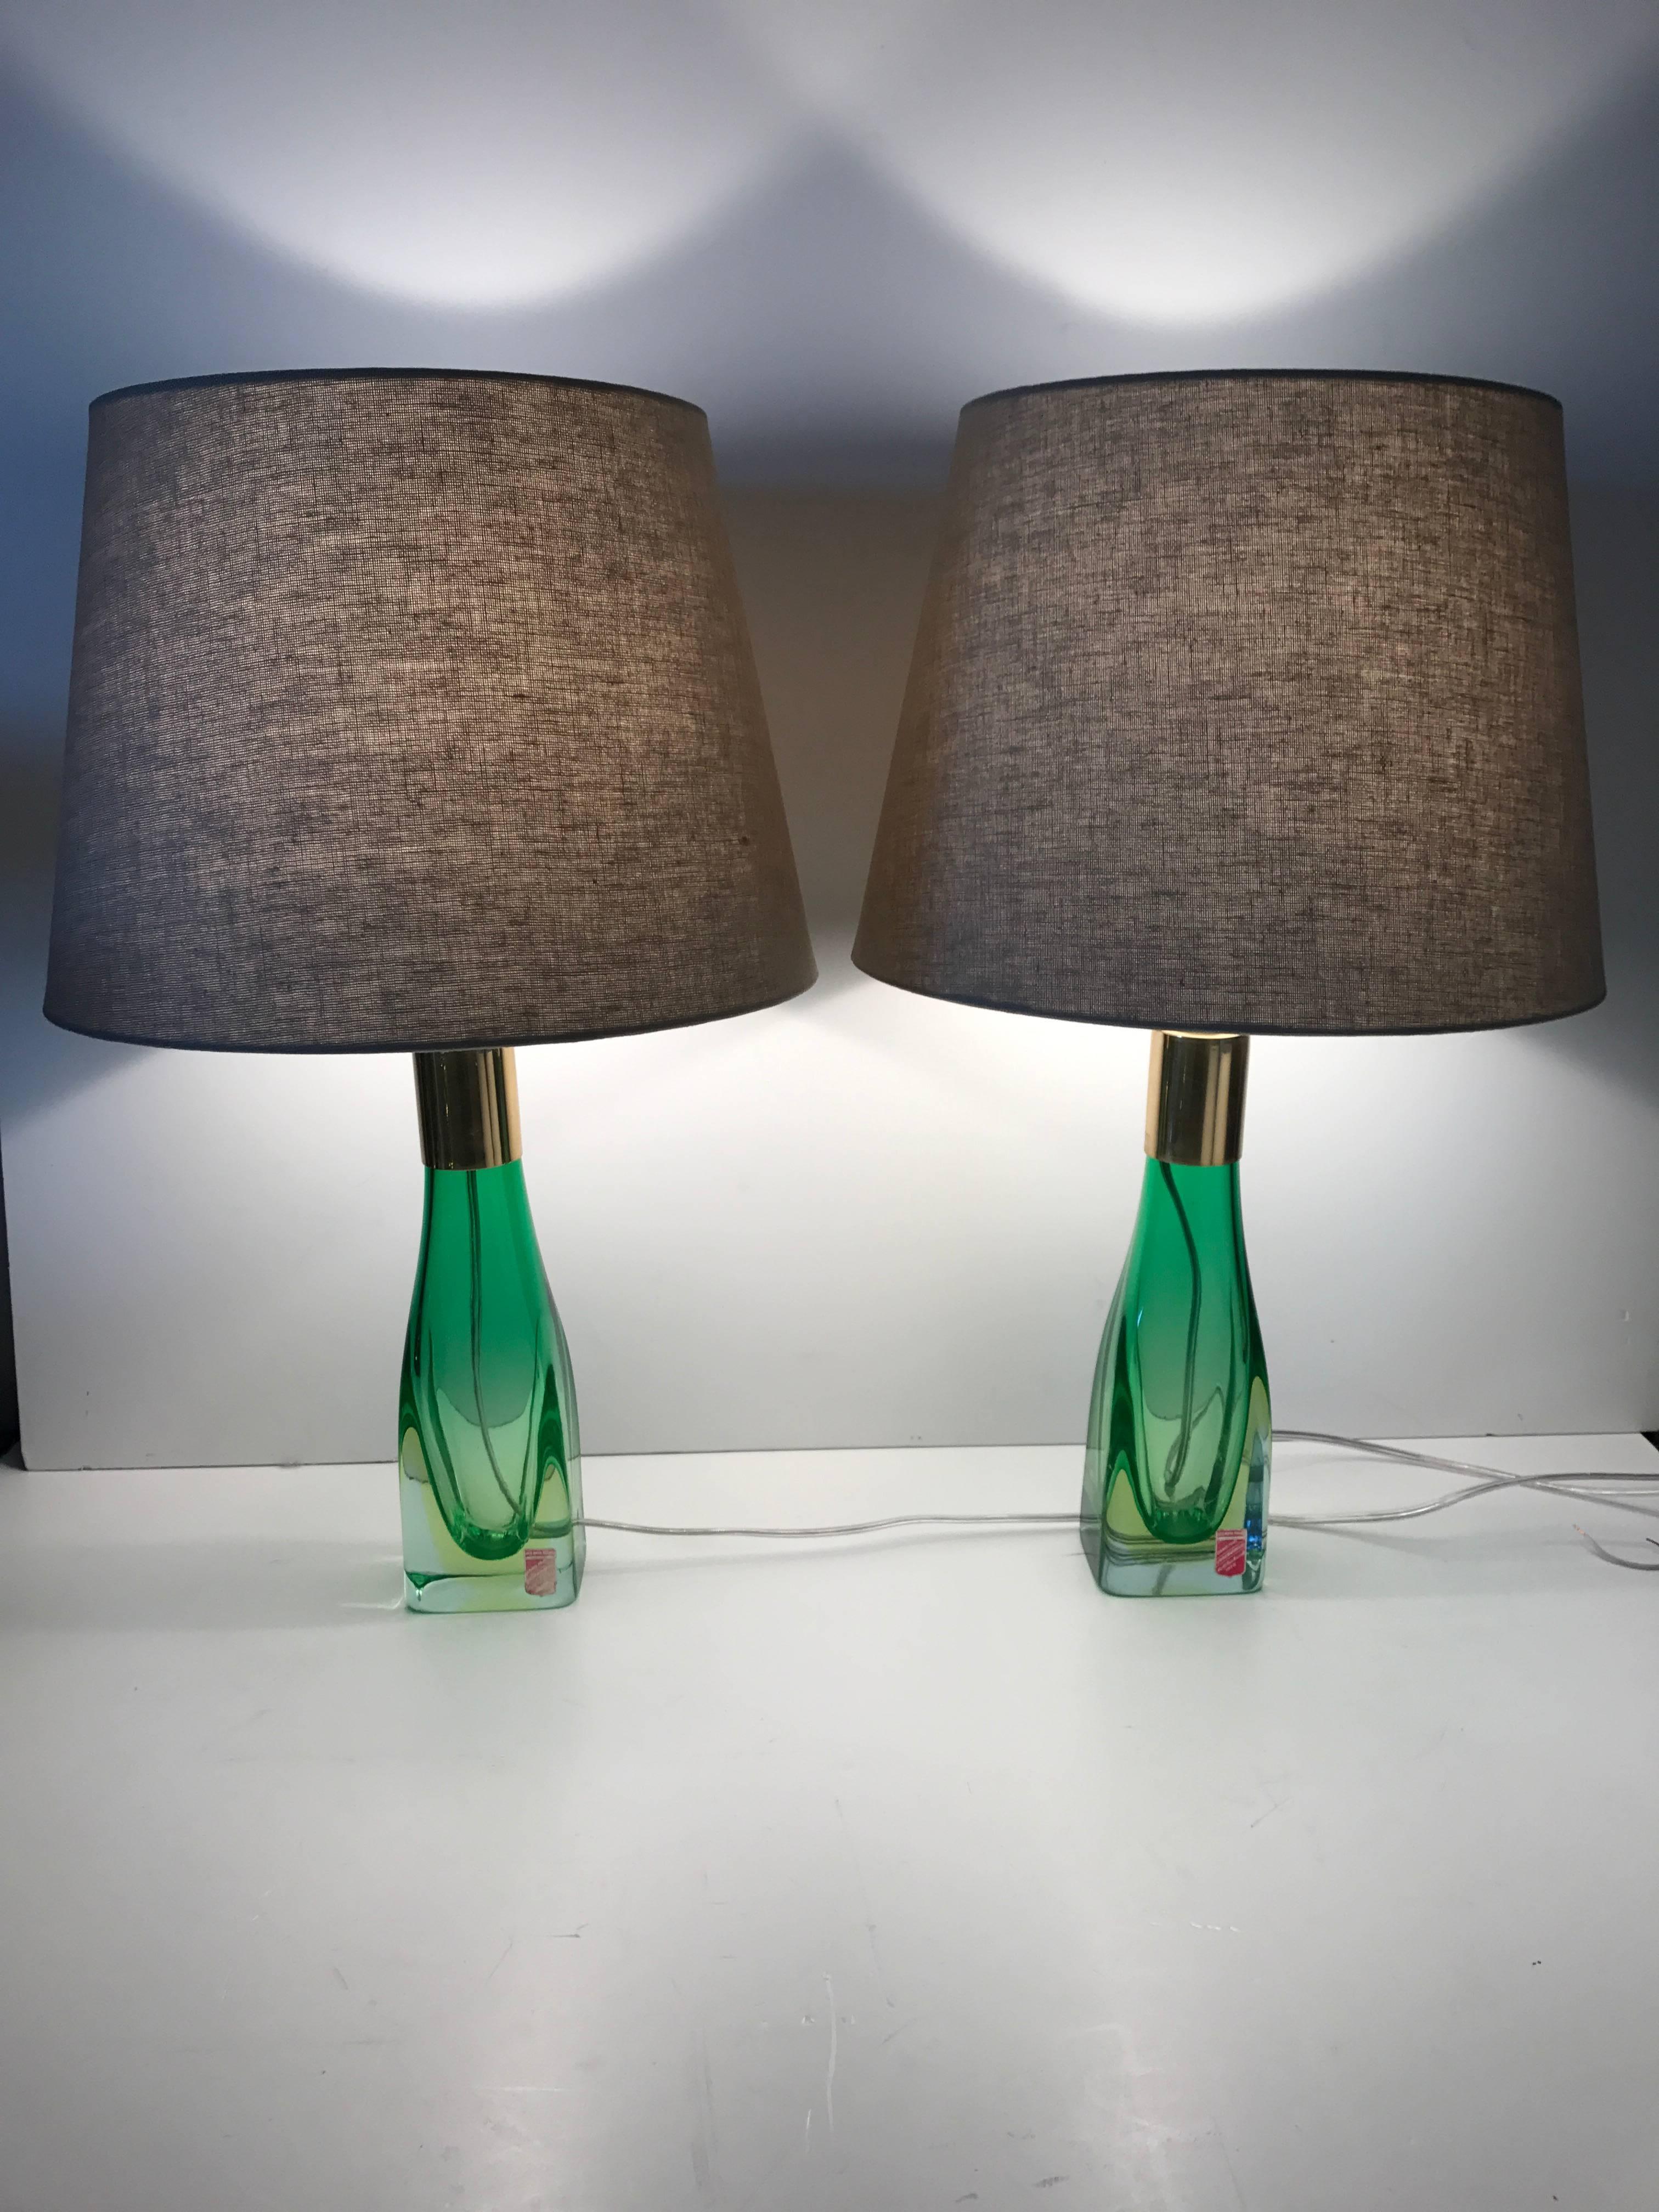 Pair of Italian Venetian Murano art glass table lamps 1958 Arte Nuova Murano.
A very beautiful pair of Italian table lamps by Murano 1958. The lamps are in a fantastic condition and all electrical components have been thoroughly checked and replaced